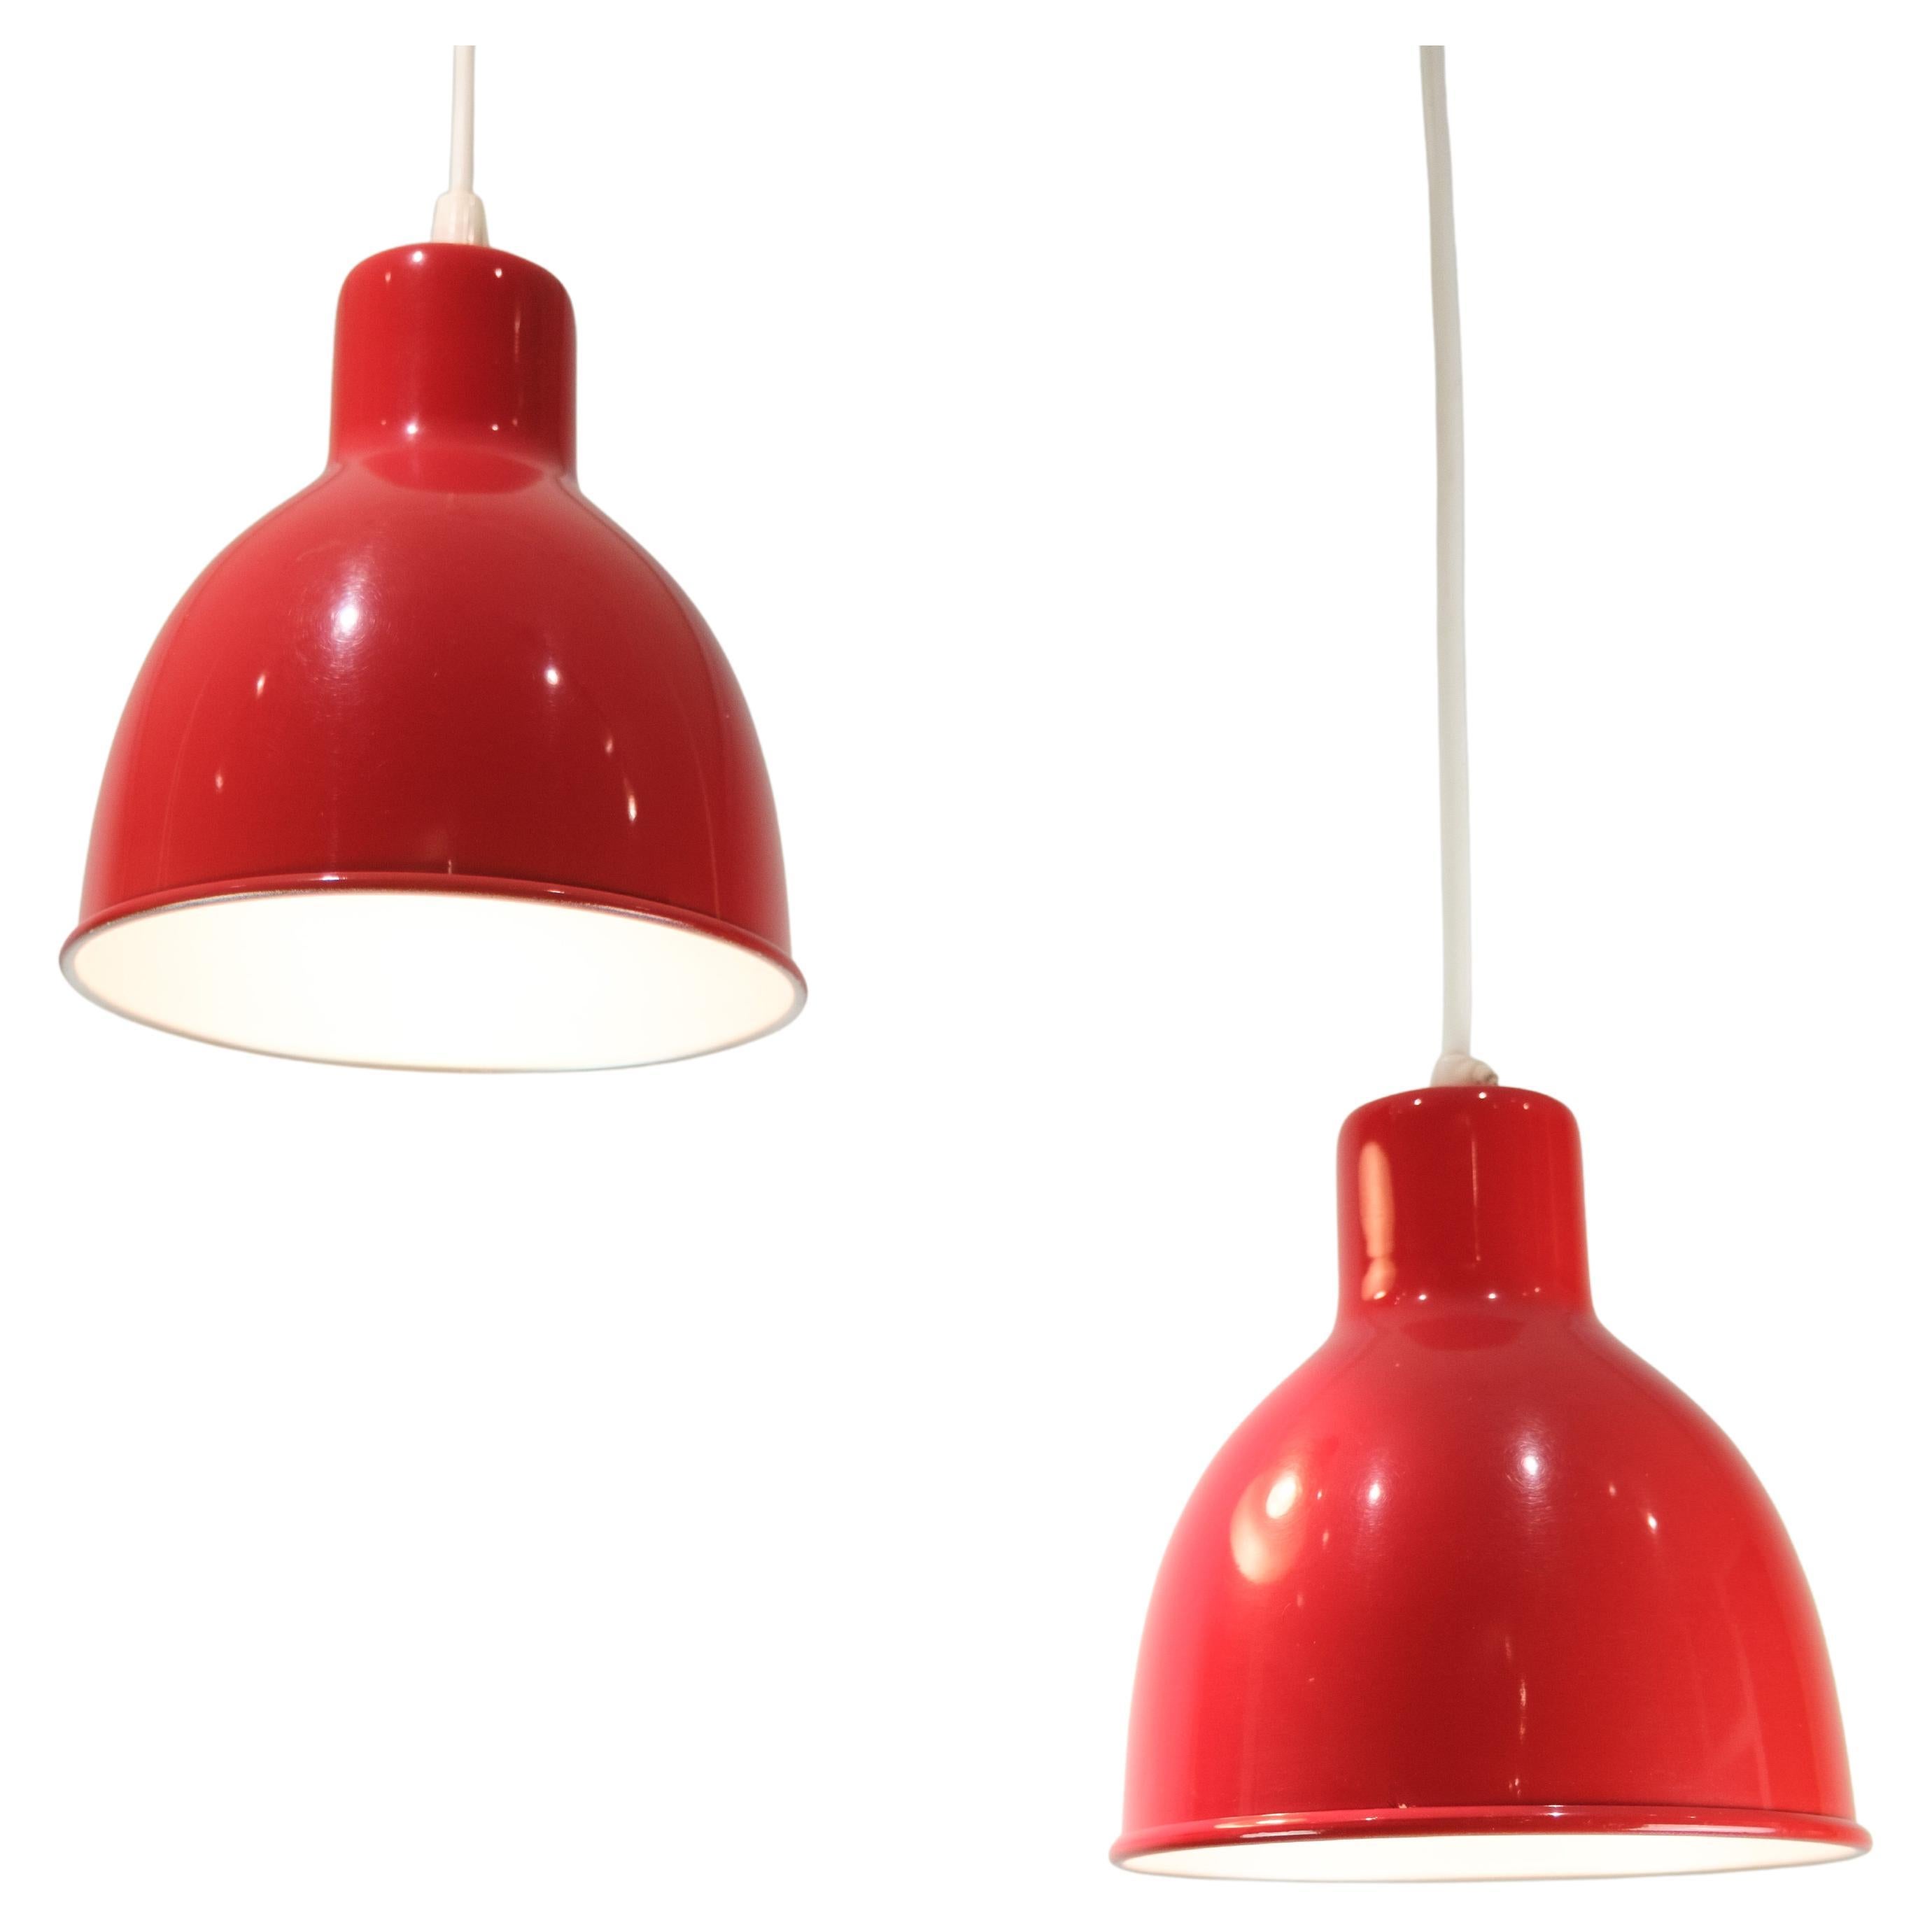 Set Of 2 Pendants Made In Red, Danish Design From 1970s